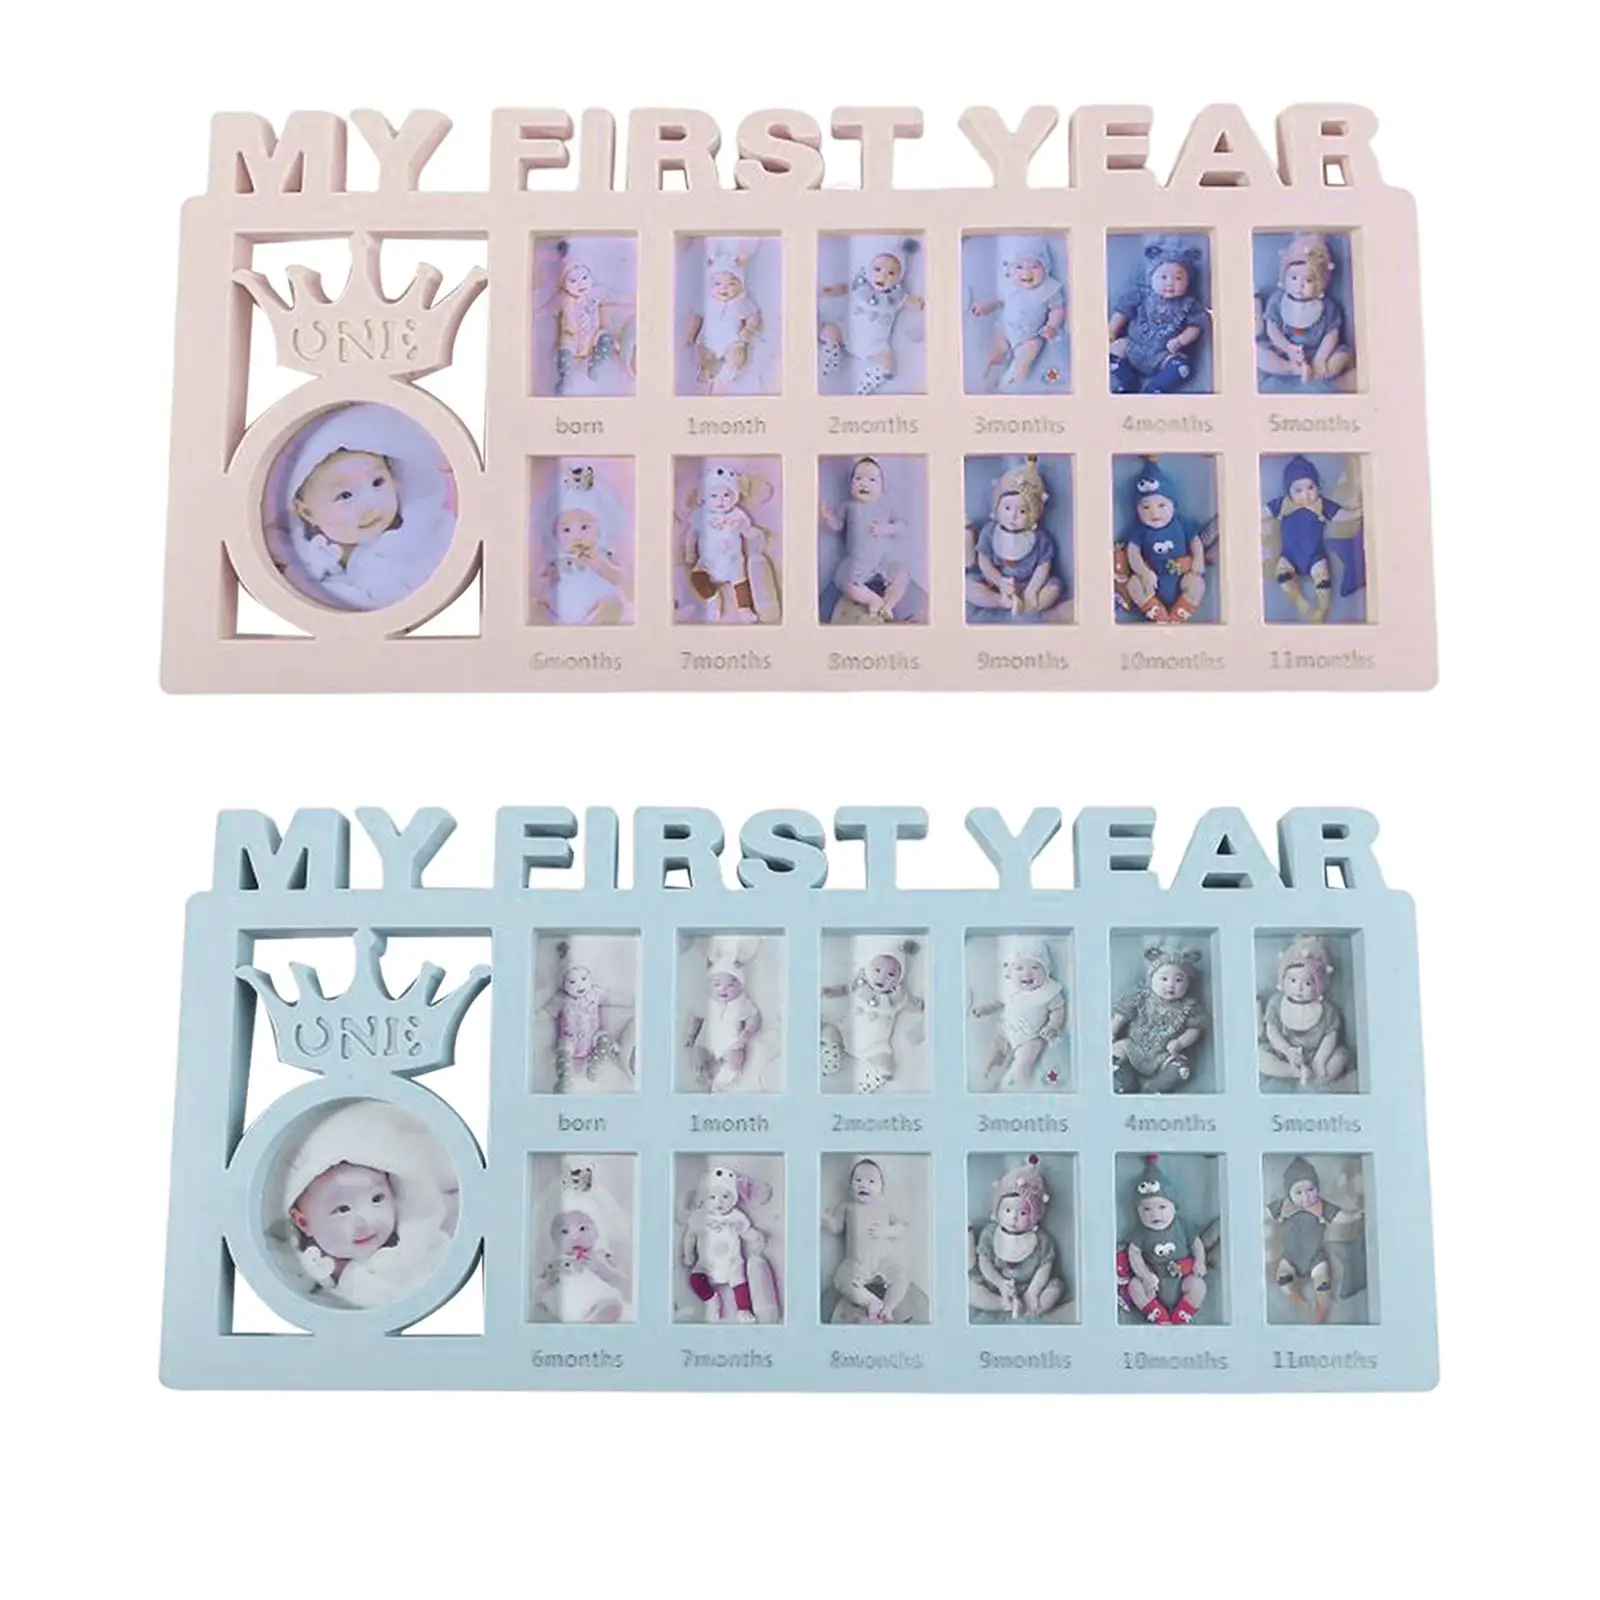   Year Photo Frame Photographs Albums Infant 12 Month Picture Frame